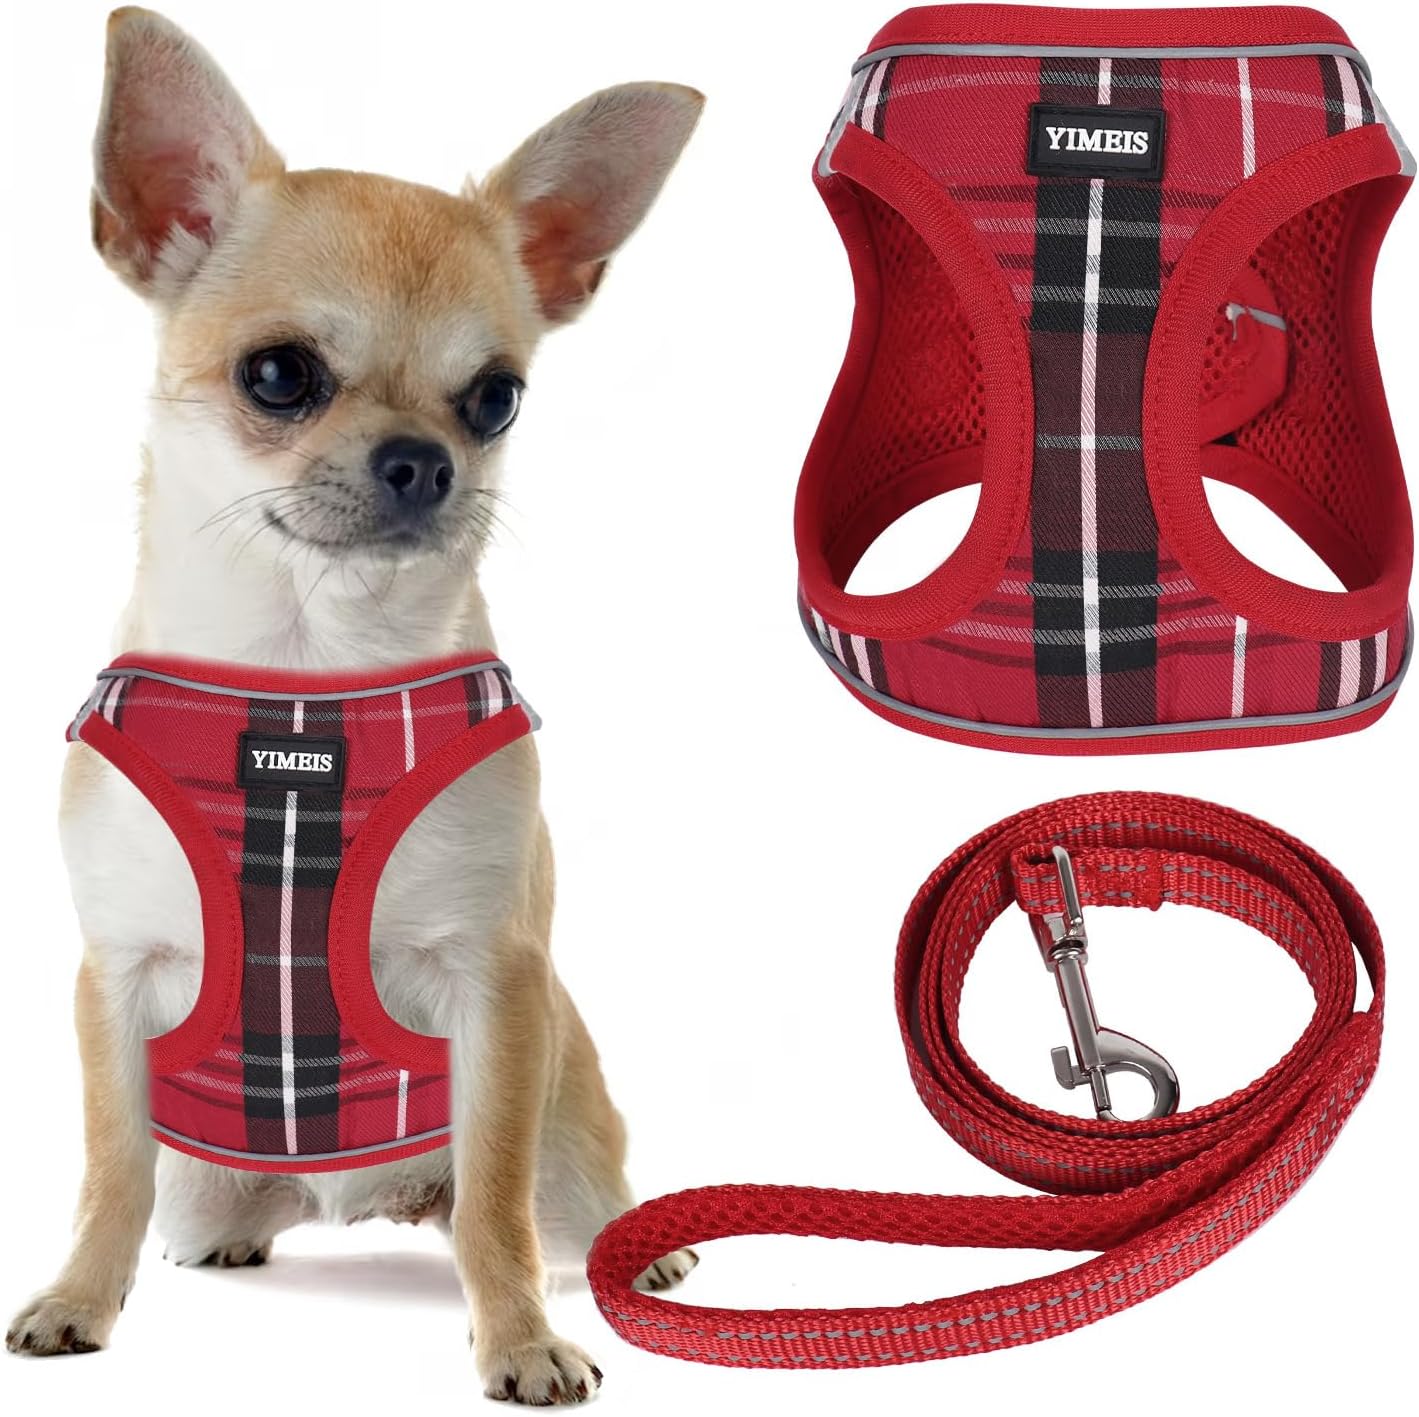 YIMEIS Dog Harness and Leash Set, No Pull Soft Mesh Pet Harness, Reflective Adjustable Puppy Vest for Small Medium Large Dogs, Cats (red-S (Pack of 1)